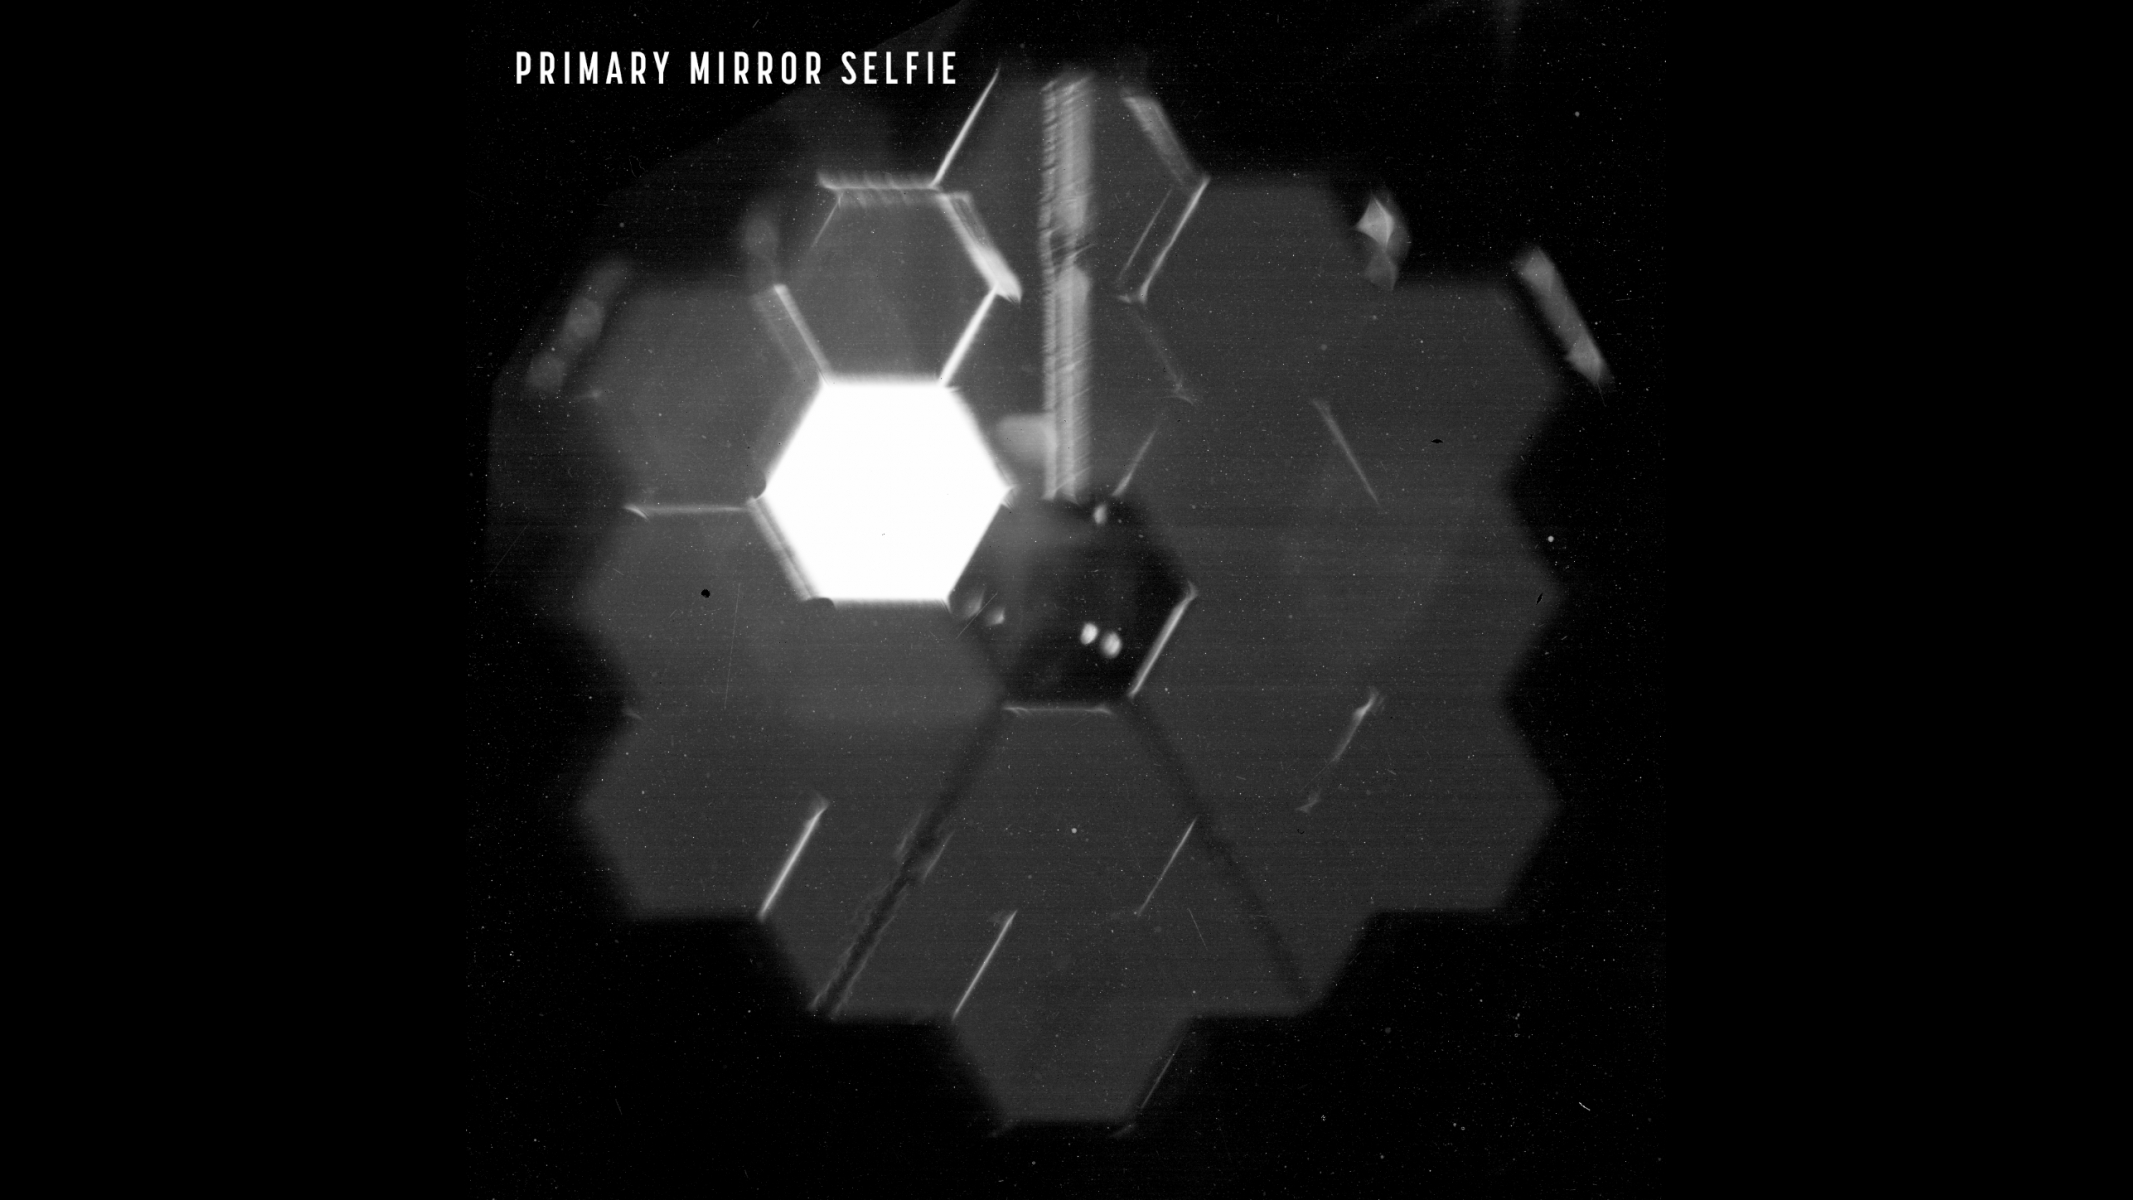 A selfie shows the 18 segments of the James Webb Space Telescope's primary mirror as seen from a specialized camera inside the NIRCam instrument.